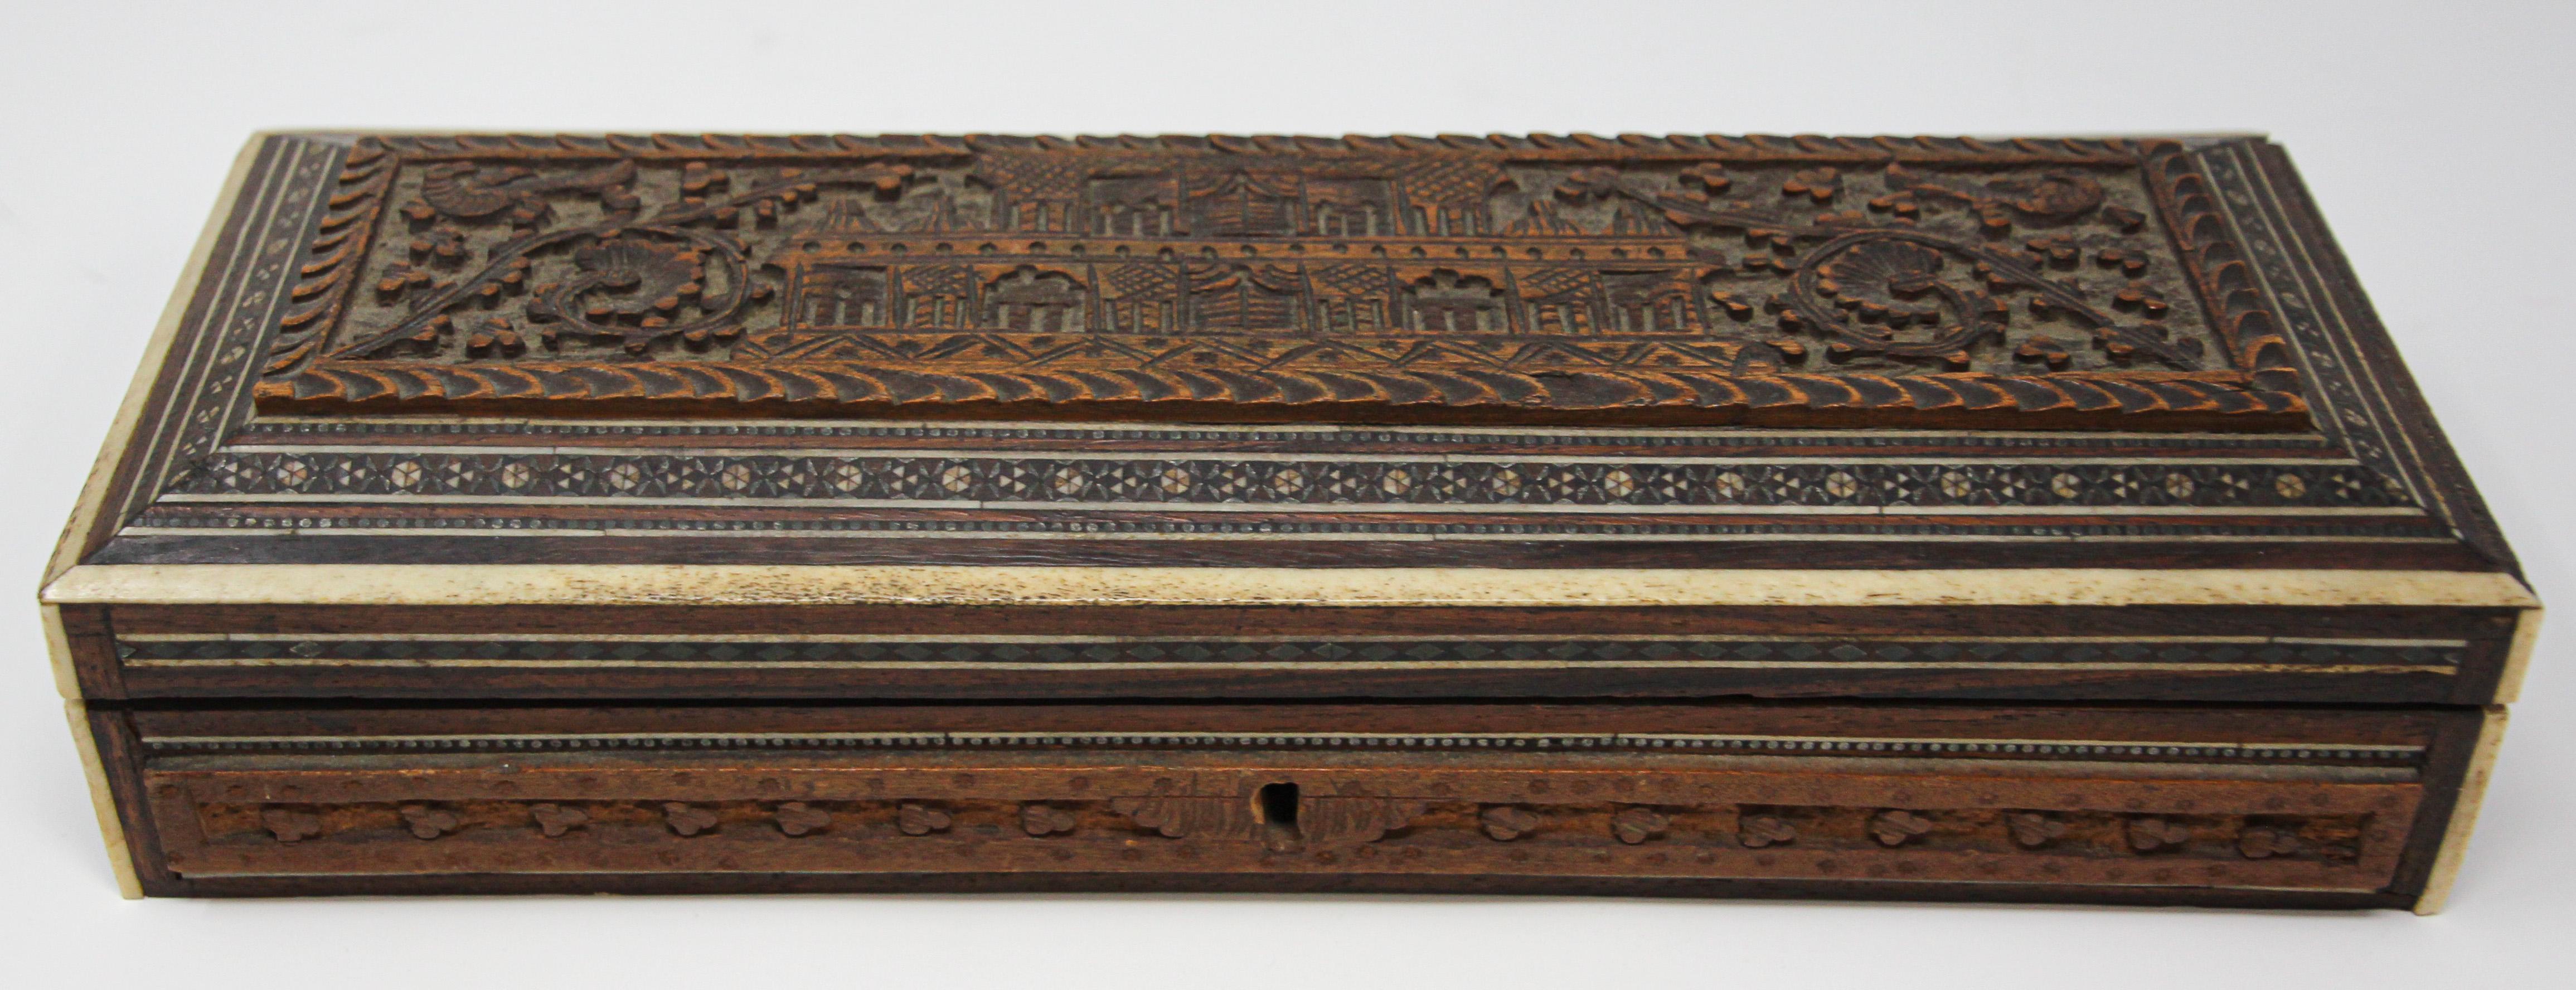 Agra Fine Antique Anglo Indian Mughal Carved Box For Sale